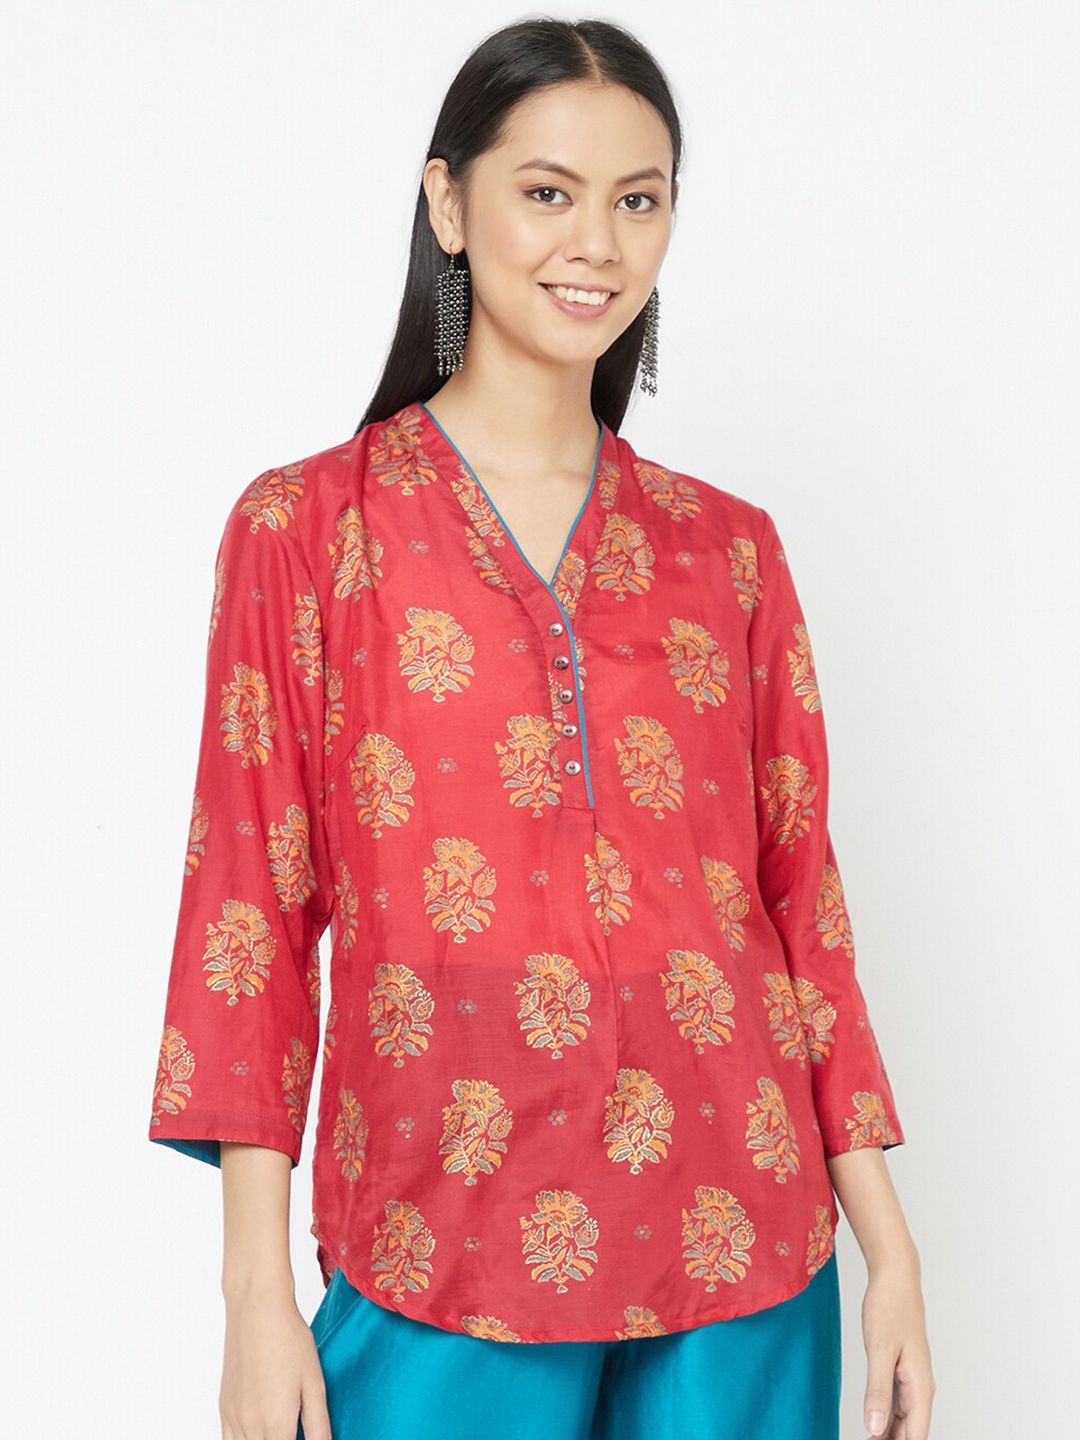 Fabindia Red & Gold-Toned Ethnic Motifs Printed Top Price in India